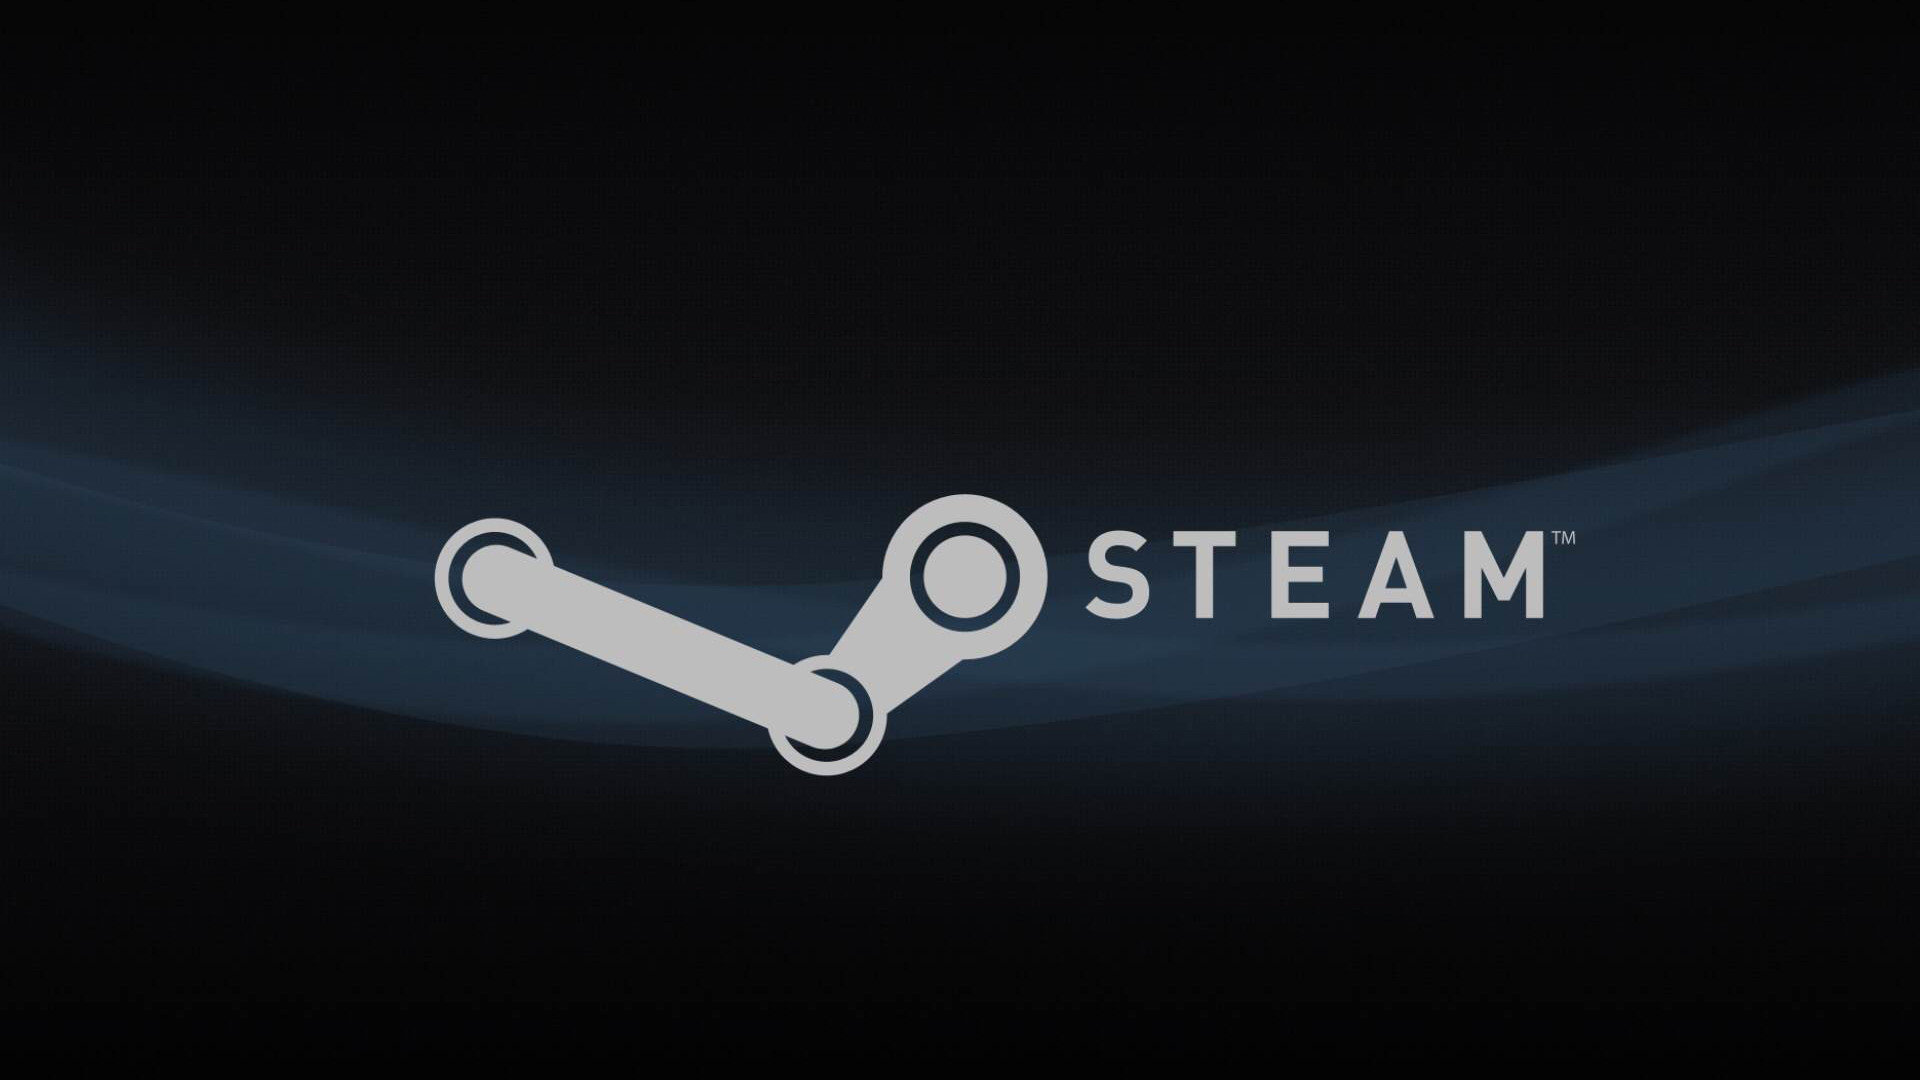 1920x1080 STEAM WALLPAPERS FREE Wallpapers & Background Images .